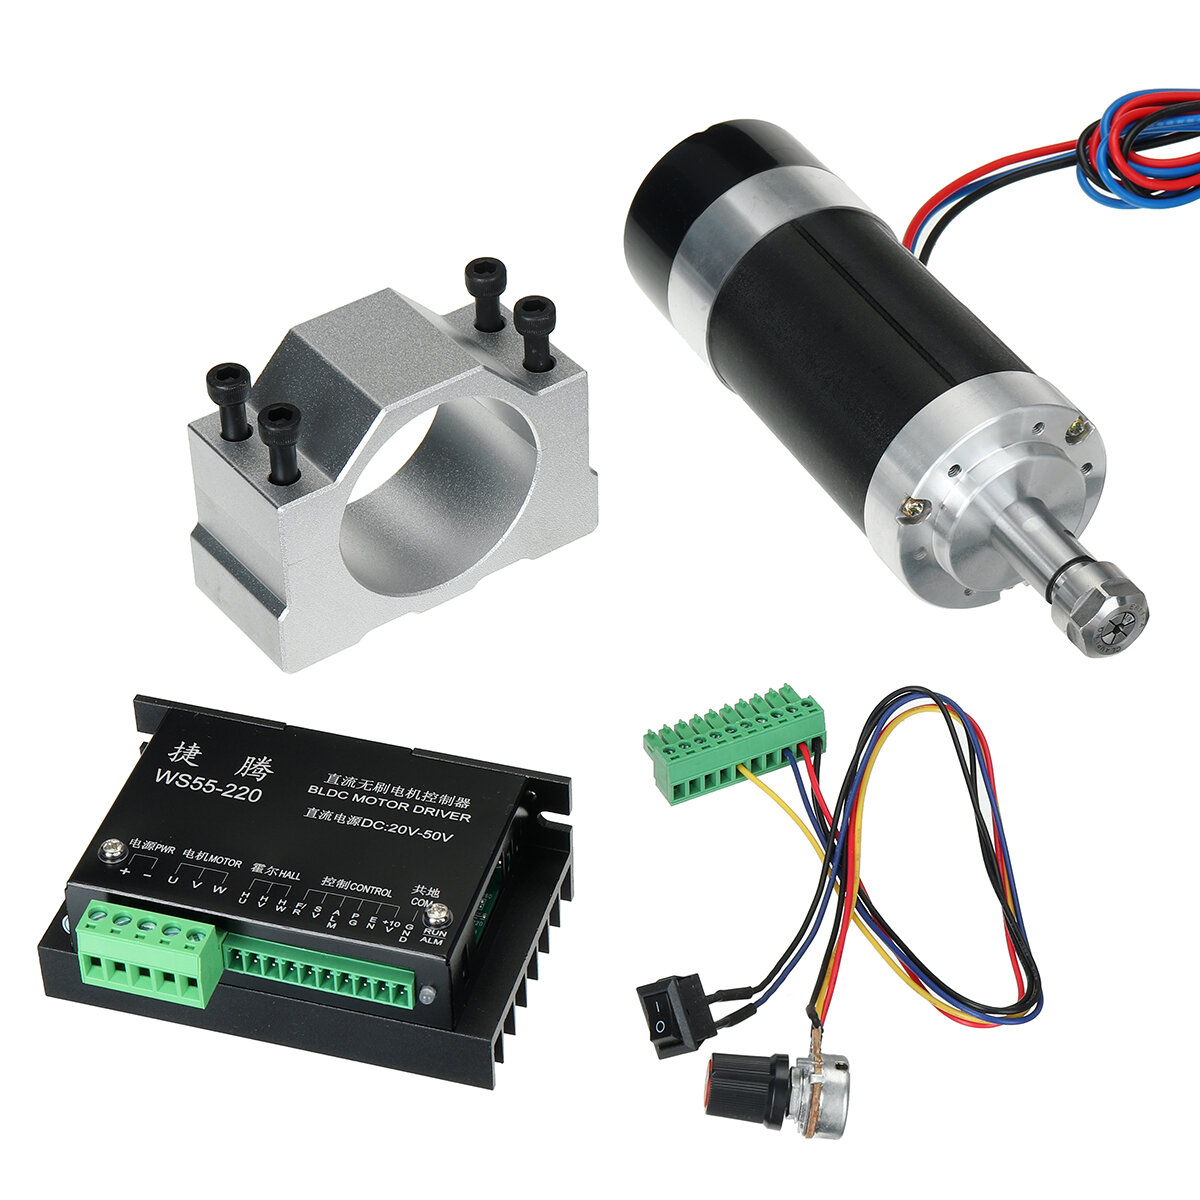 

MACHIFIT ER11 48V DC 500W High-Speed Cooling Brushless Spindle Motor for Engraving PCB Drilling, Low Noise, High Torque